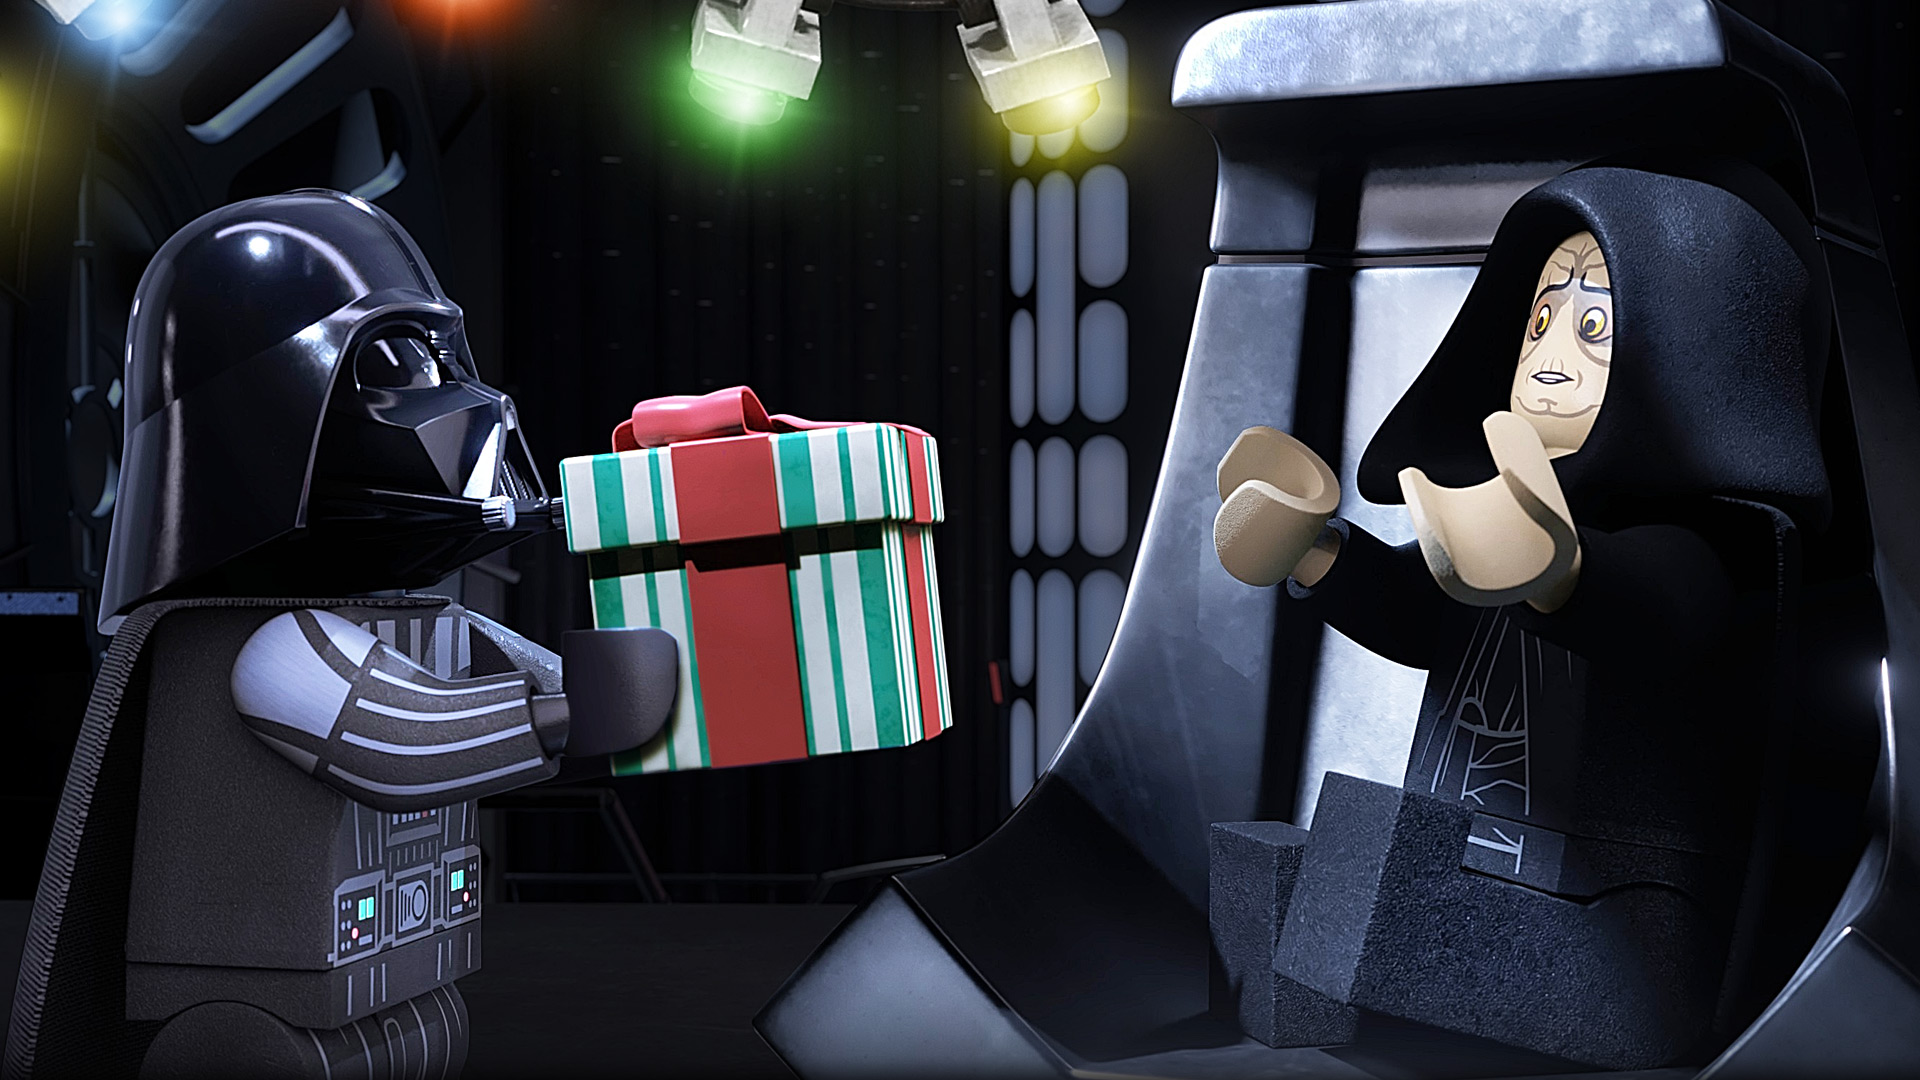 Darth Vader and Palpatine in The LEGO Star Wars Holiday Special